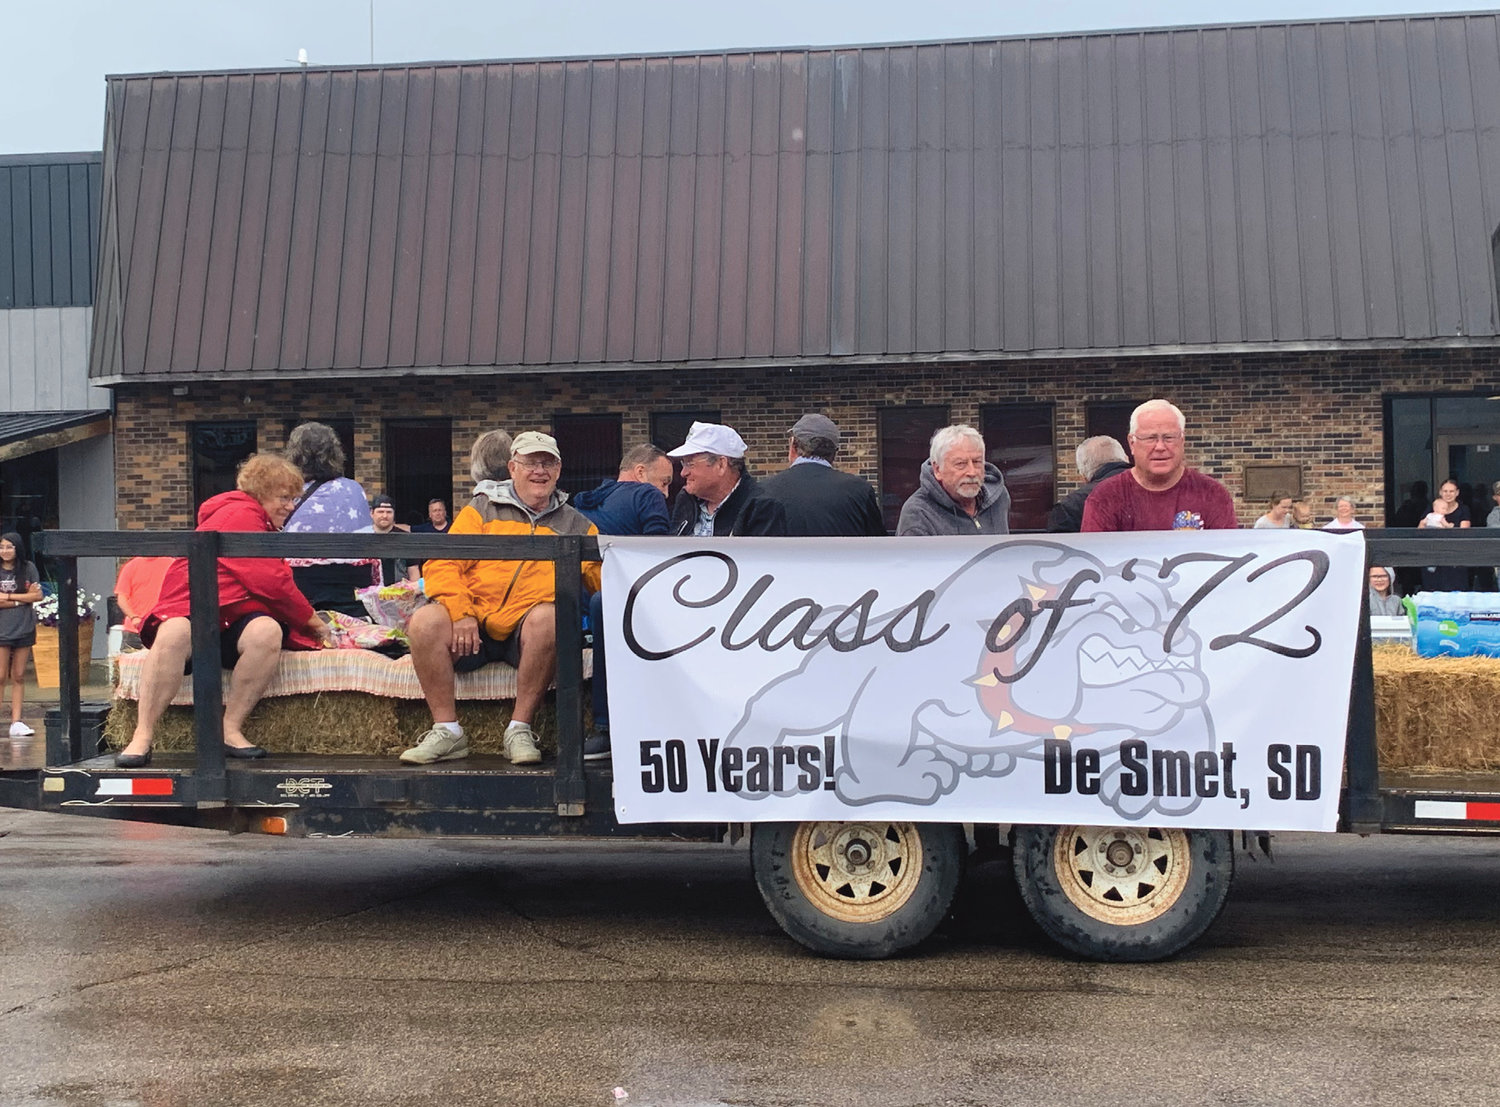 The De Smet High School Class of 1972 held a 50-year reunion and had a float in the parade.